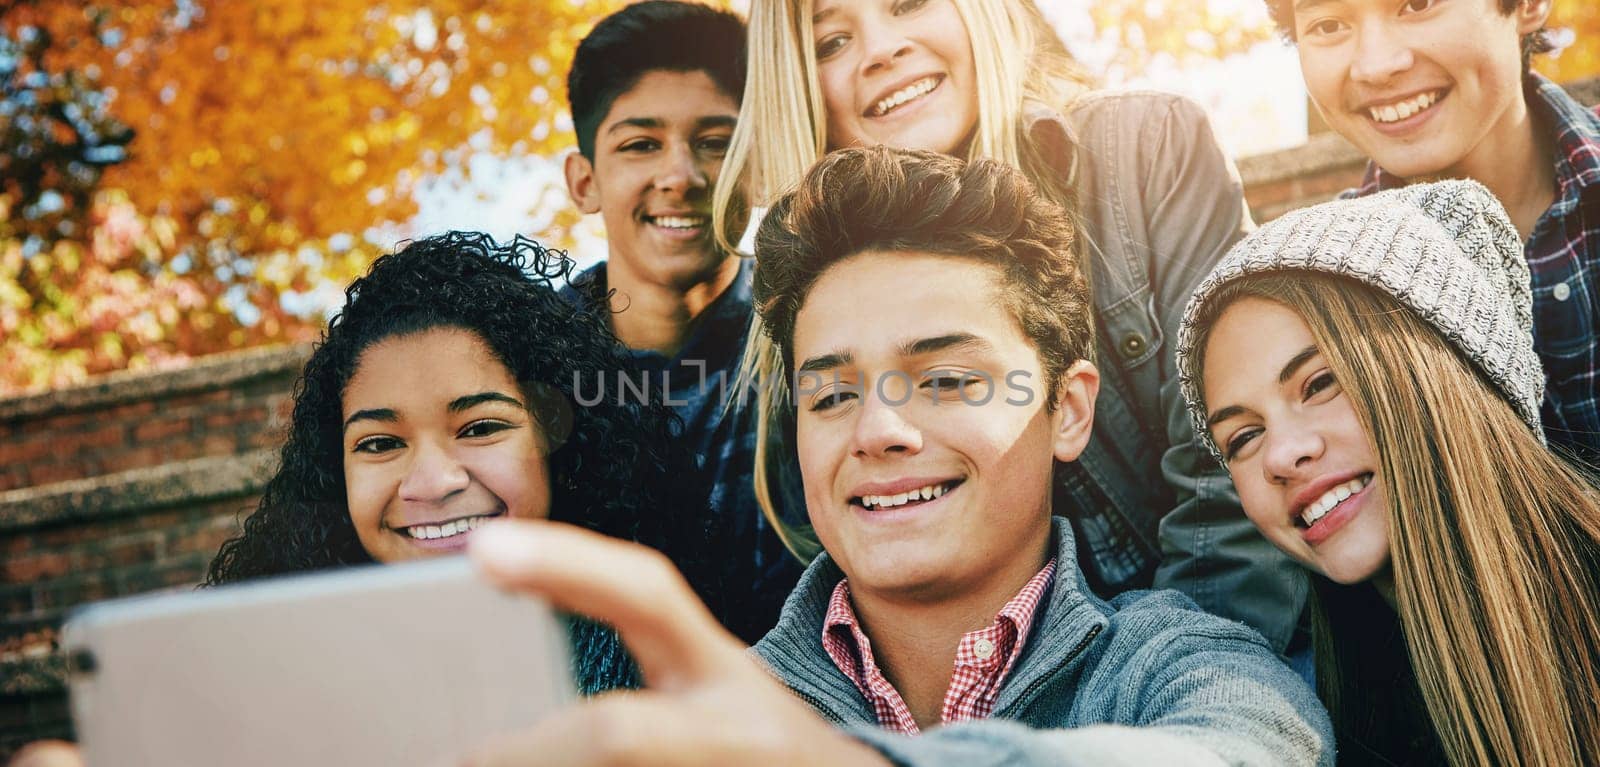 Smile, friends and a selfie in nature for bonding, fun and video call in autumn. Happy, together and diversity of kids taking a photo on technology in a park for social media or live streaming.